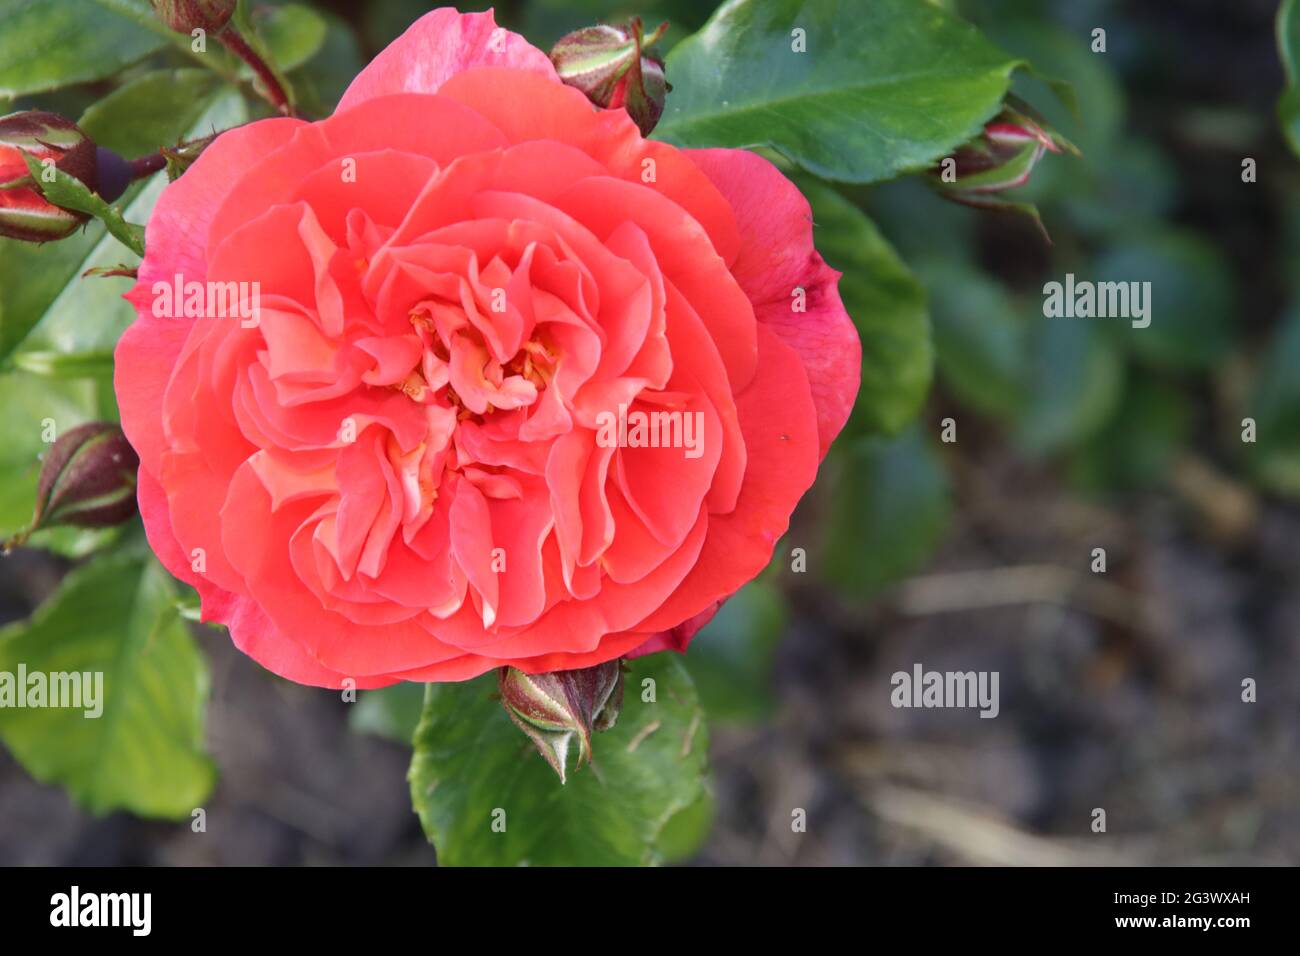 Page 3 - Gebrüder High Resolution Stock Photography and Images - Alamy